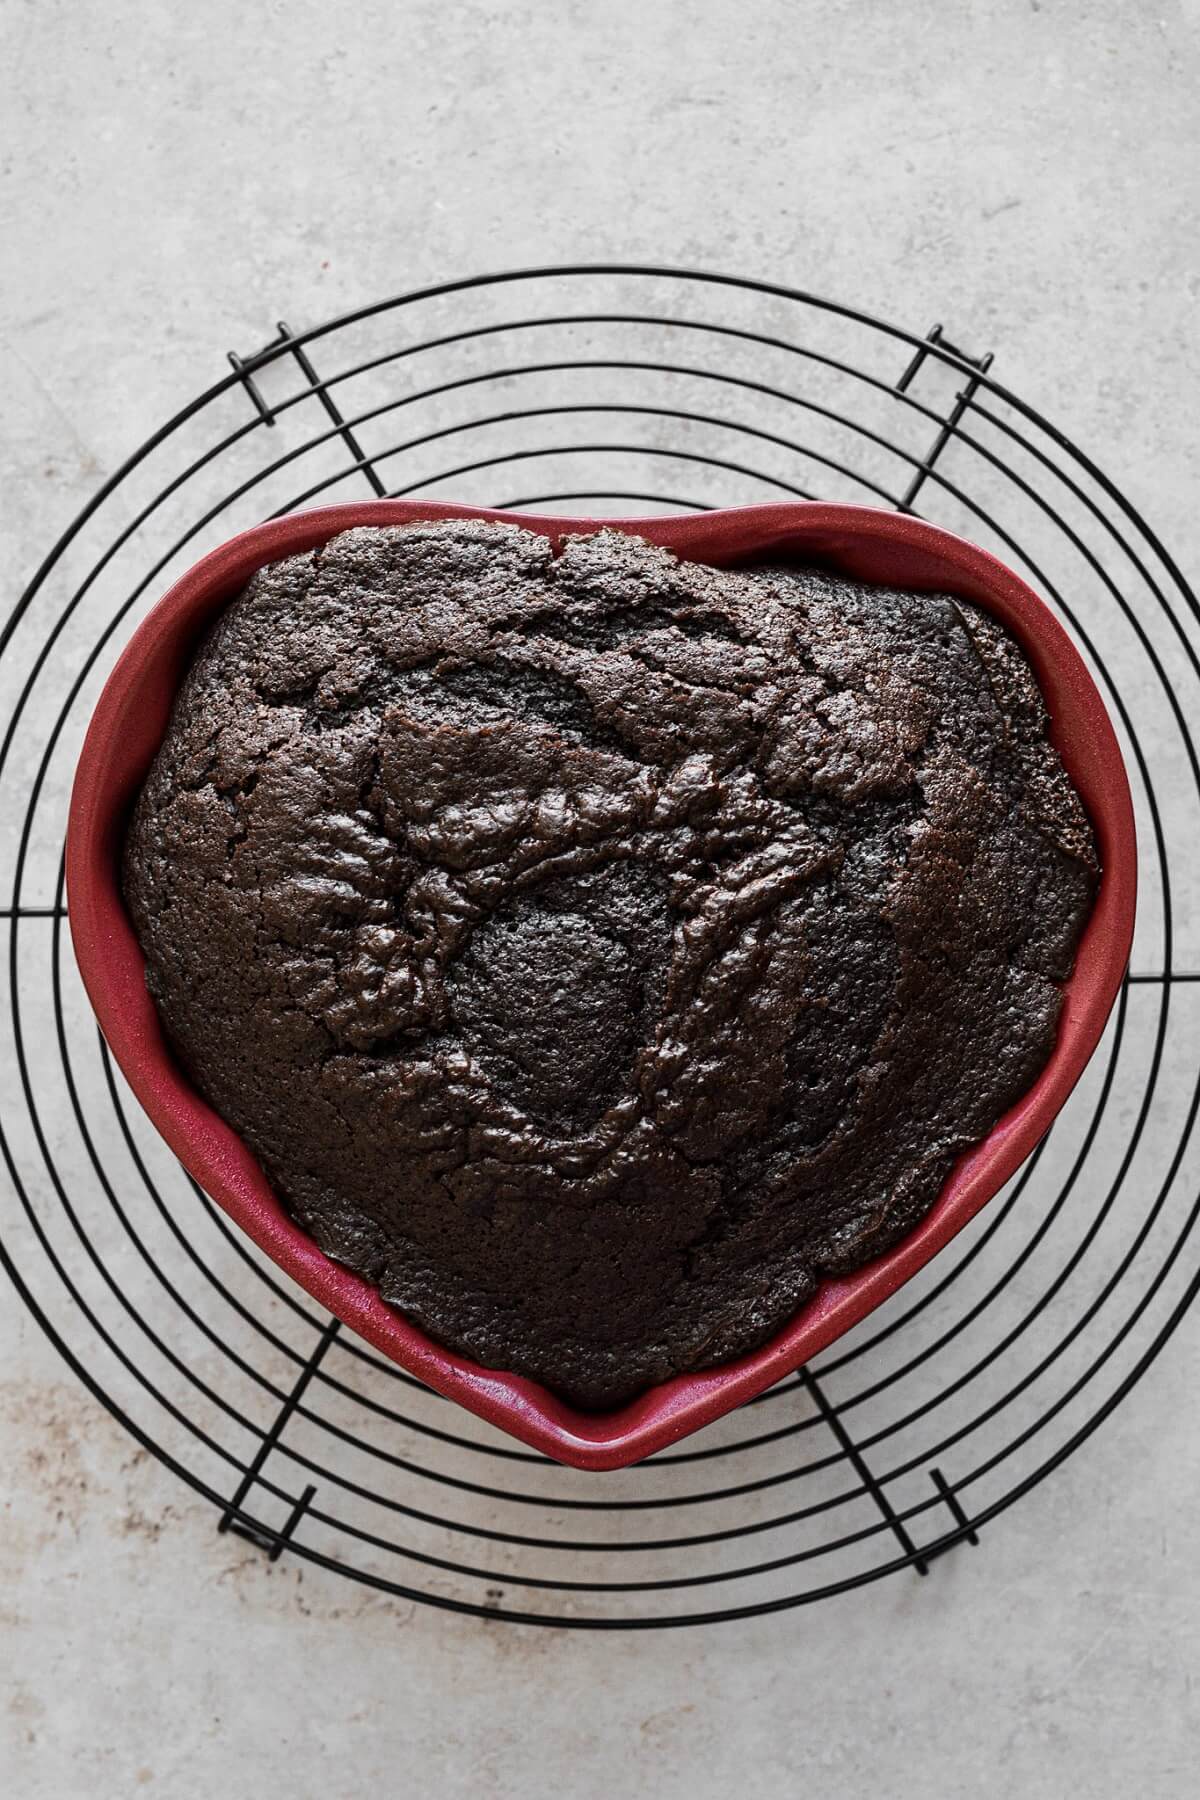 Chocolate cake in a heart shaped bundt pan.